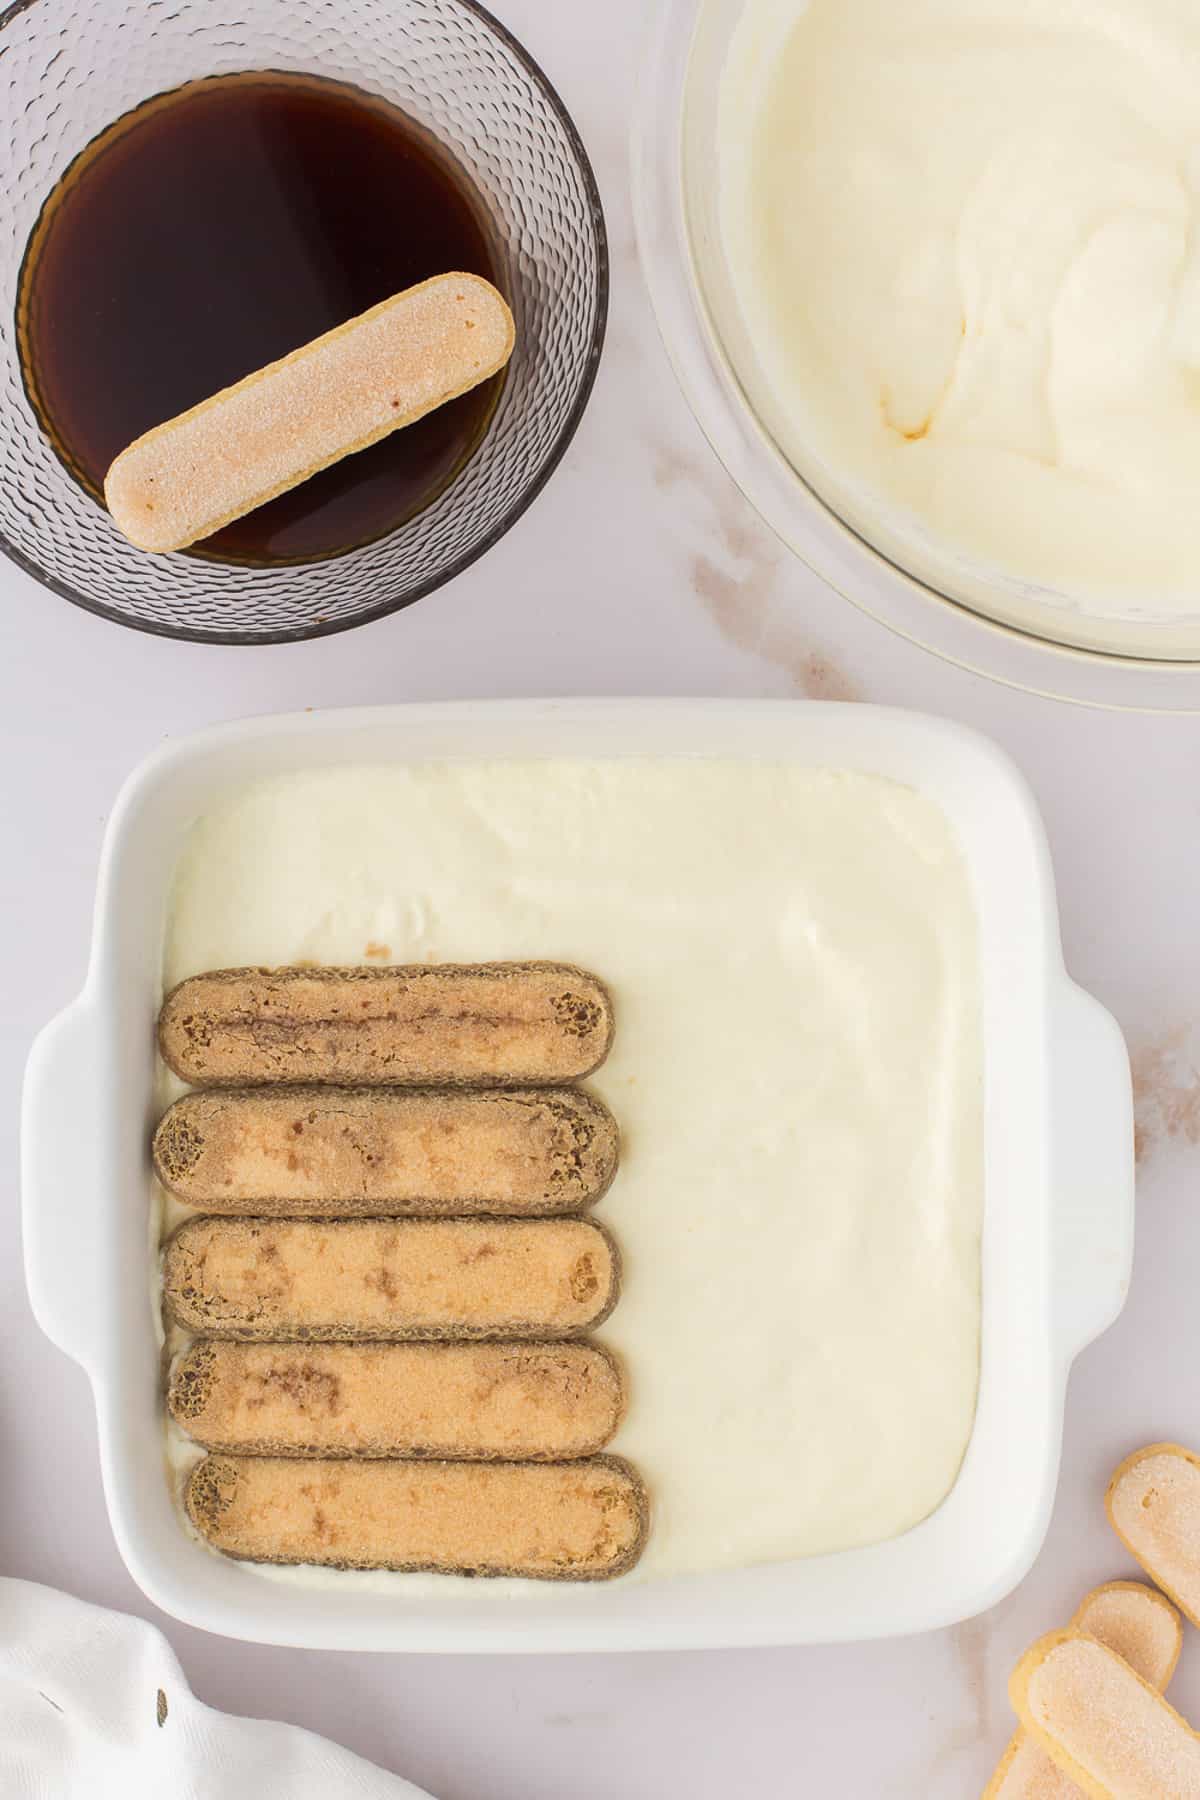 Placing second layer of ladyfingers on top of cream.